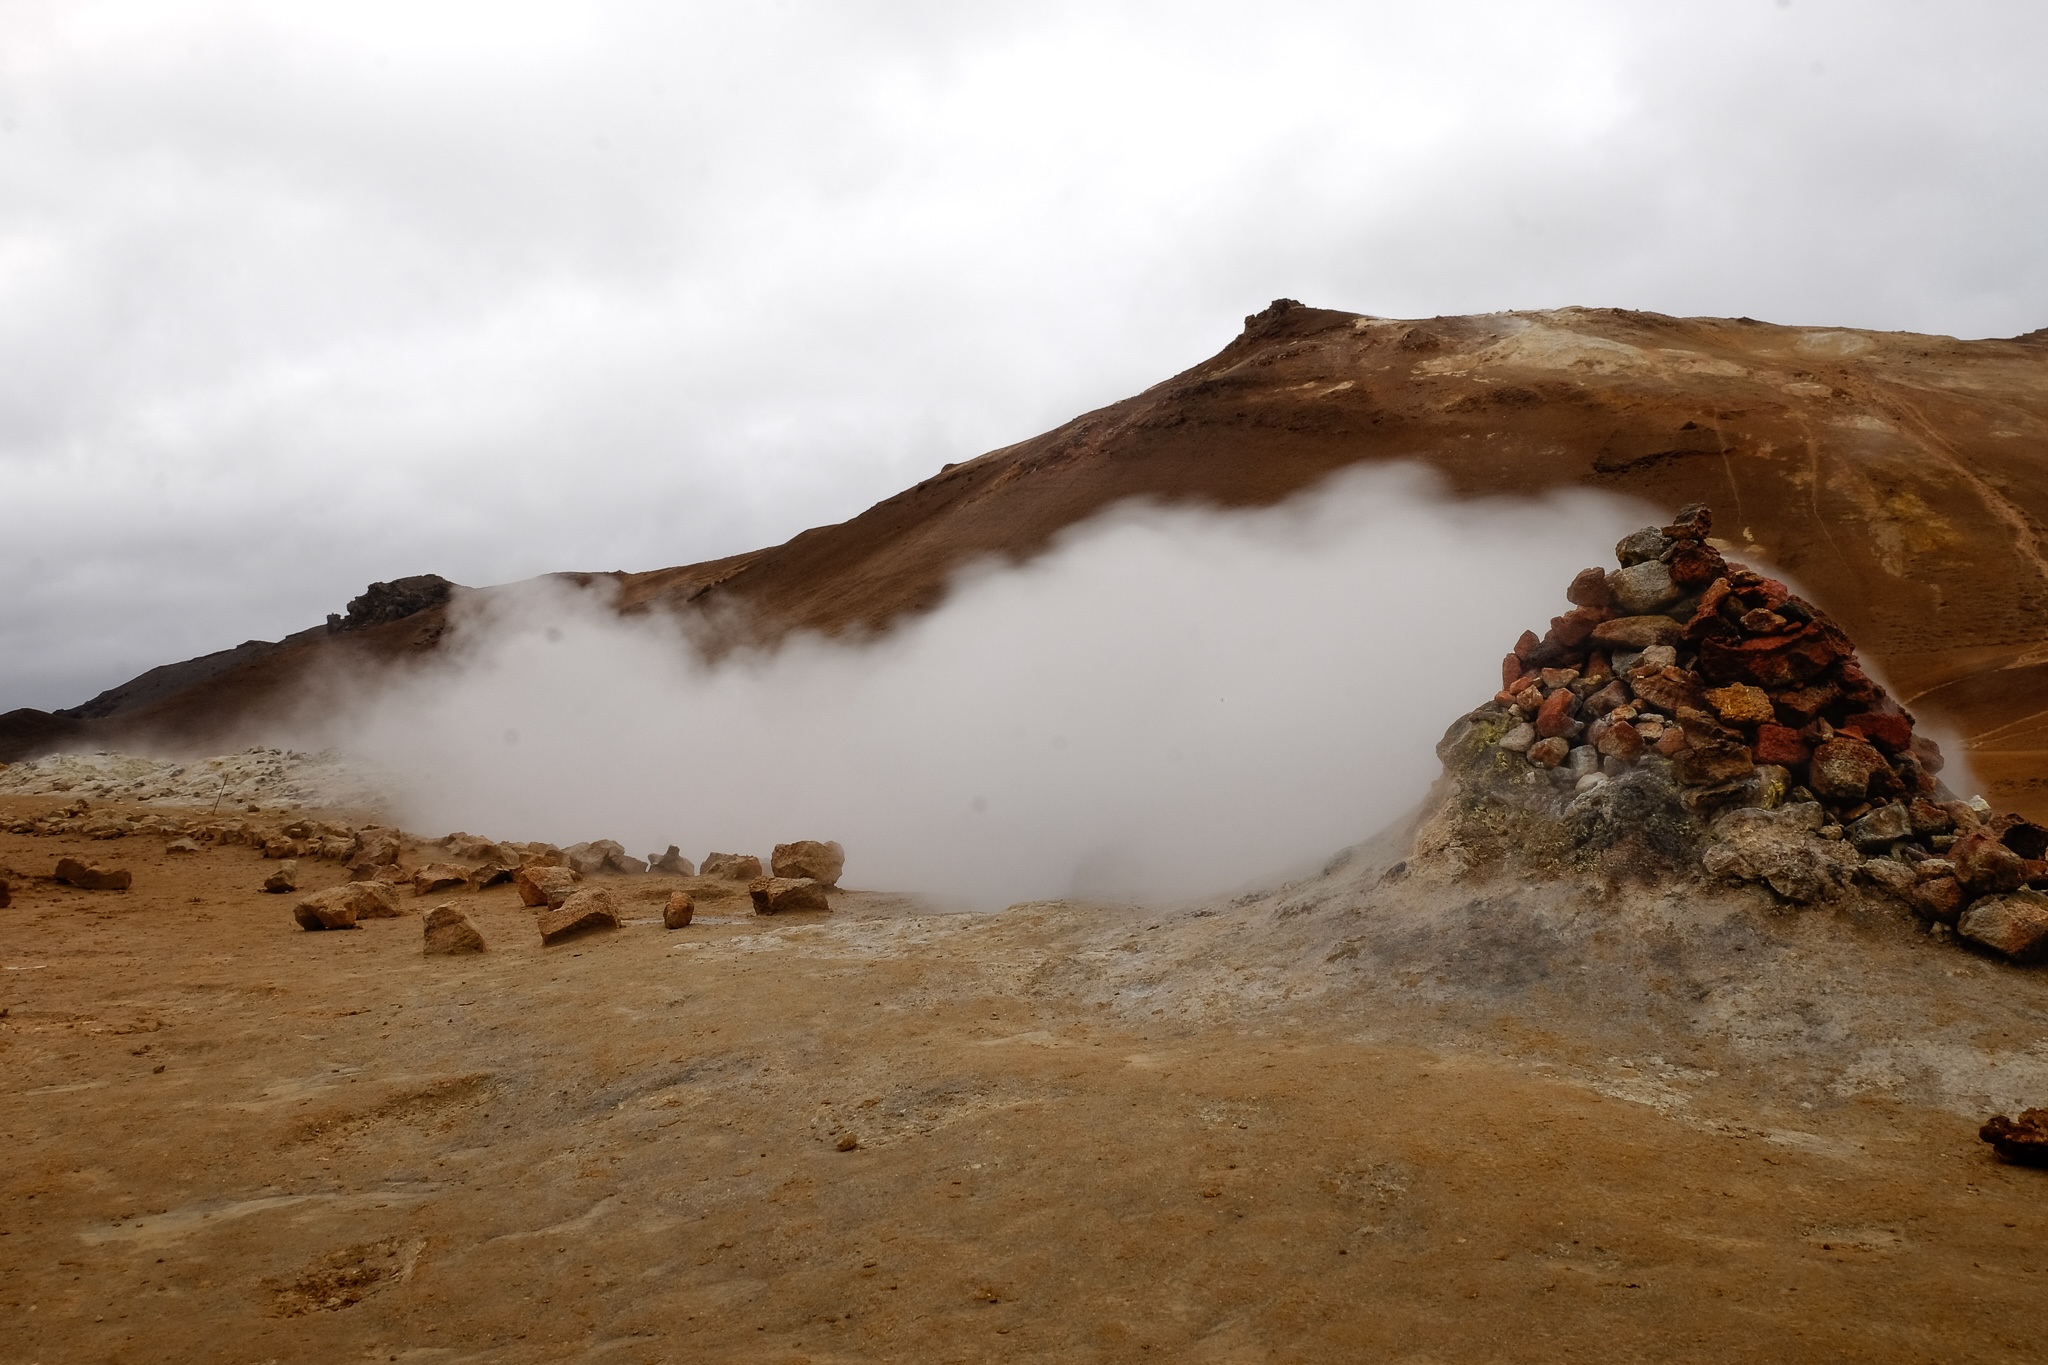 Geothermal steam geiser of red and brown rock billows with white steam and travels across a yellow-brown barren landscape